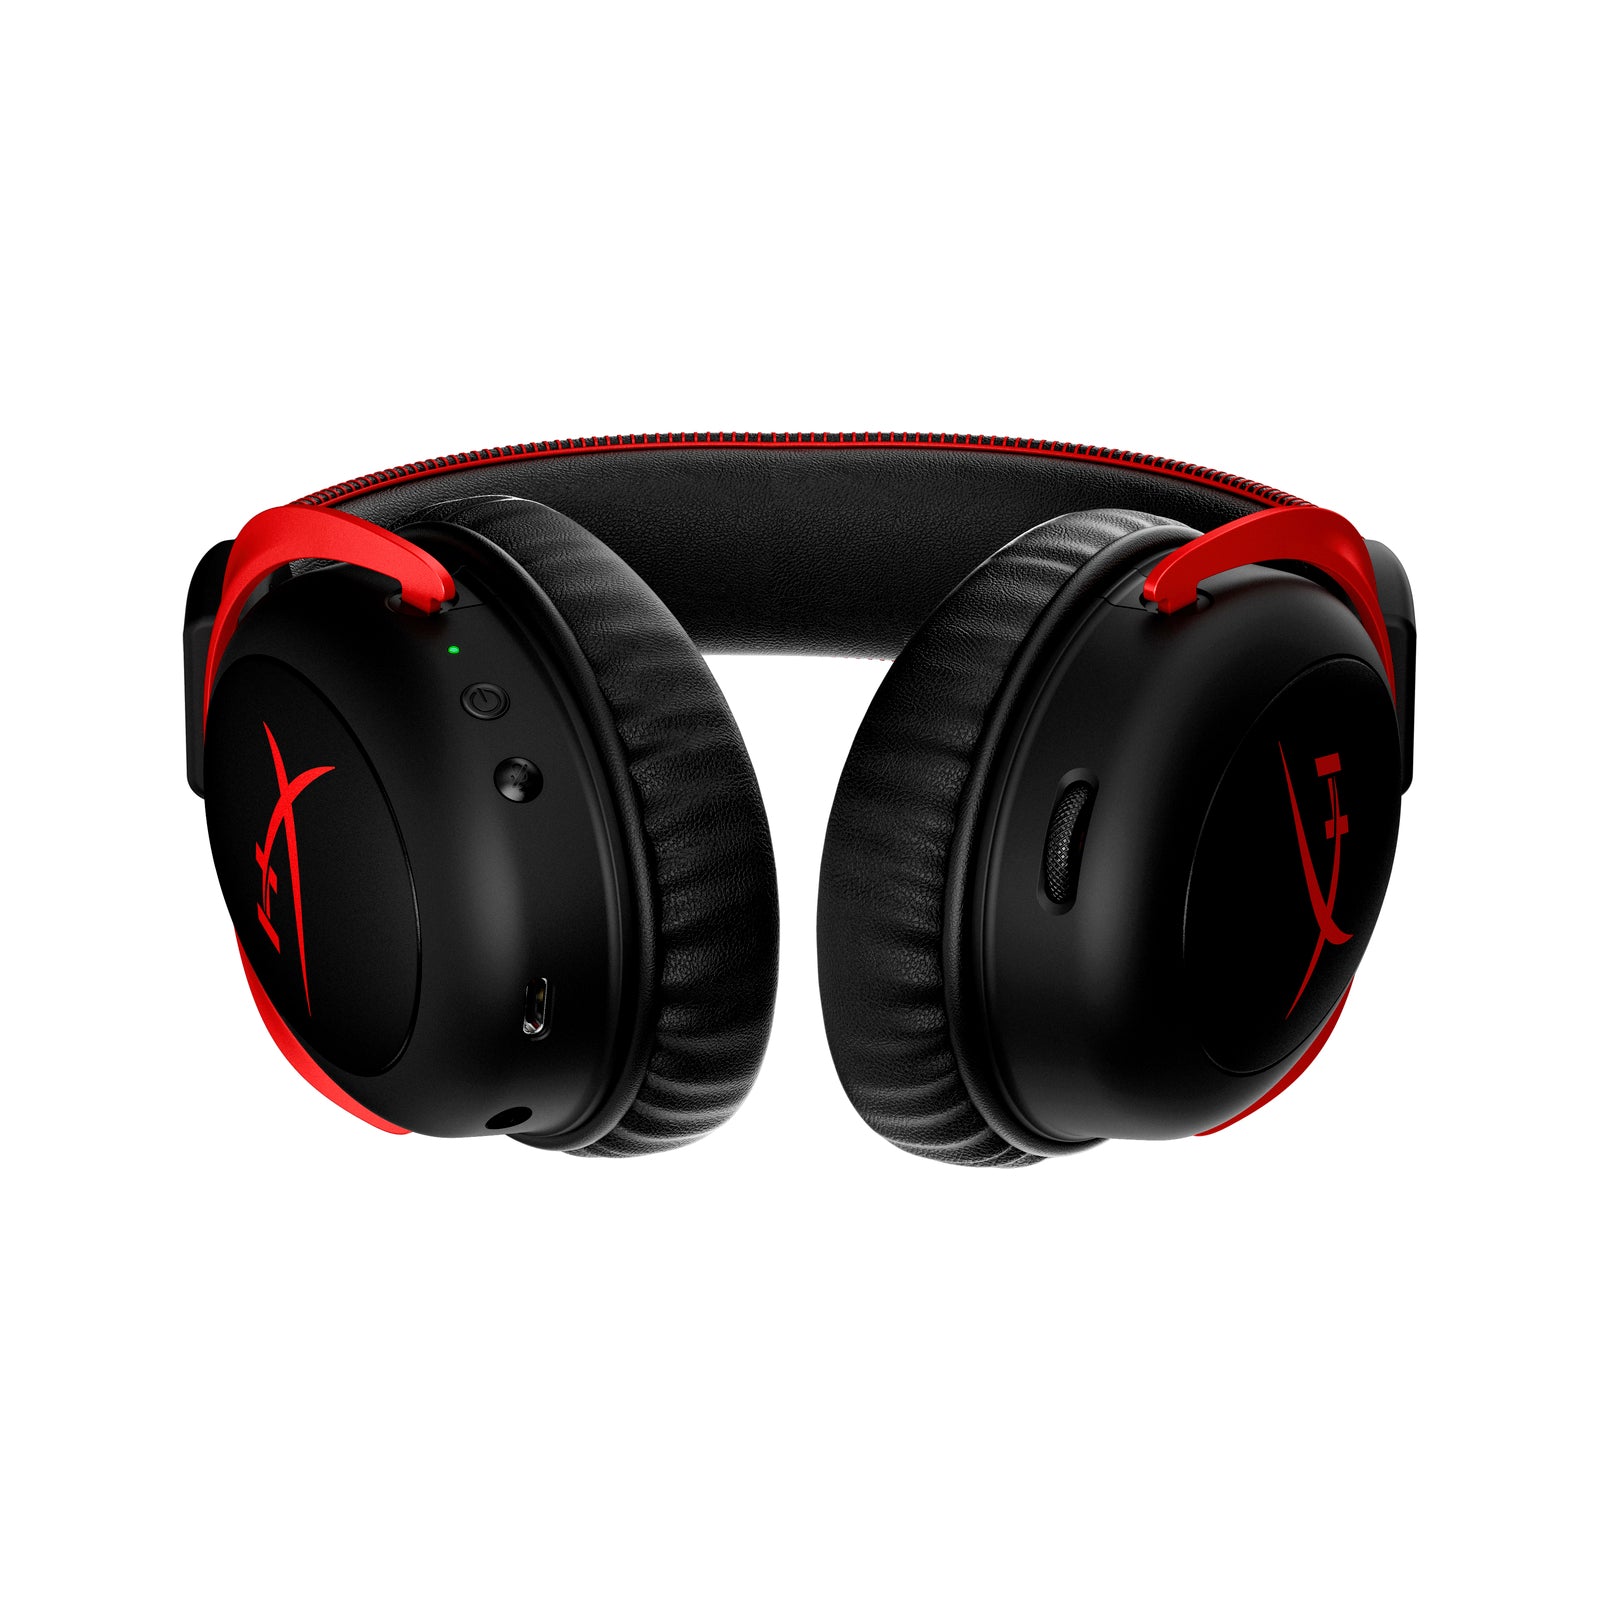 A view of the audio controls for power, volume, mic mute and mic monitoring on the base of the HyperX Cloud II wireless gaming headset